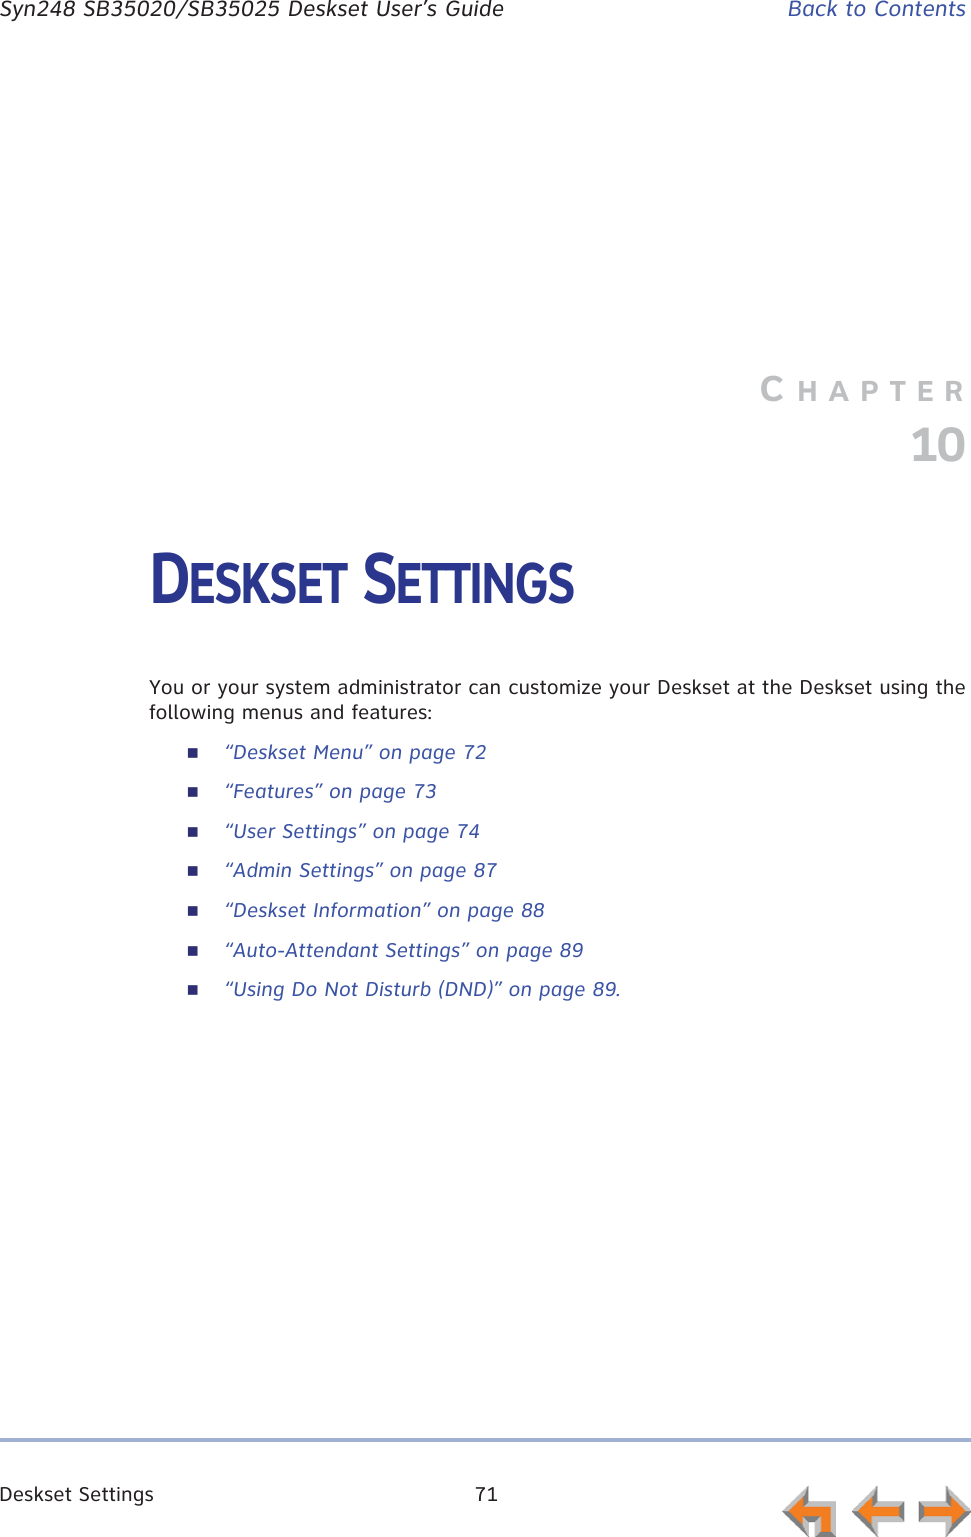 Deskset Settings 71      Syn248 SB35020/SB35025 Deskset User’s Guide Back to ContentsCHAPTER10DESKSET SETTINGSYou or your system administrator can customize your Deskset at the Deskset using the following menus and features:“Deskset Menu” on page 72“Features” on page 73“User Settings” on page 74“Admin Settings” on page 87“Deskset Information” on page 88“Auto-Attendant Settings” on page 89“Using Do Not Disturb (DND)” on page 89.